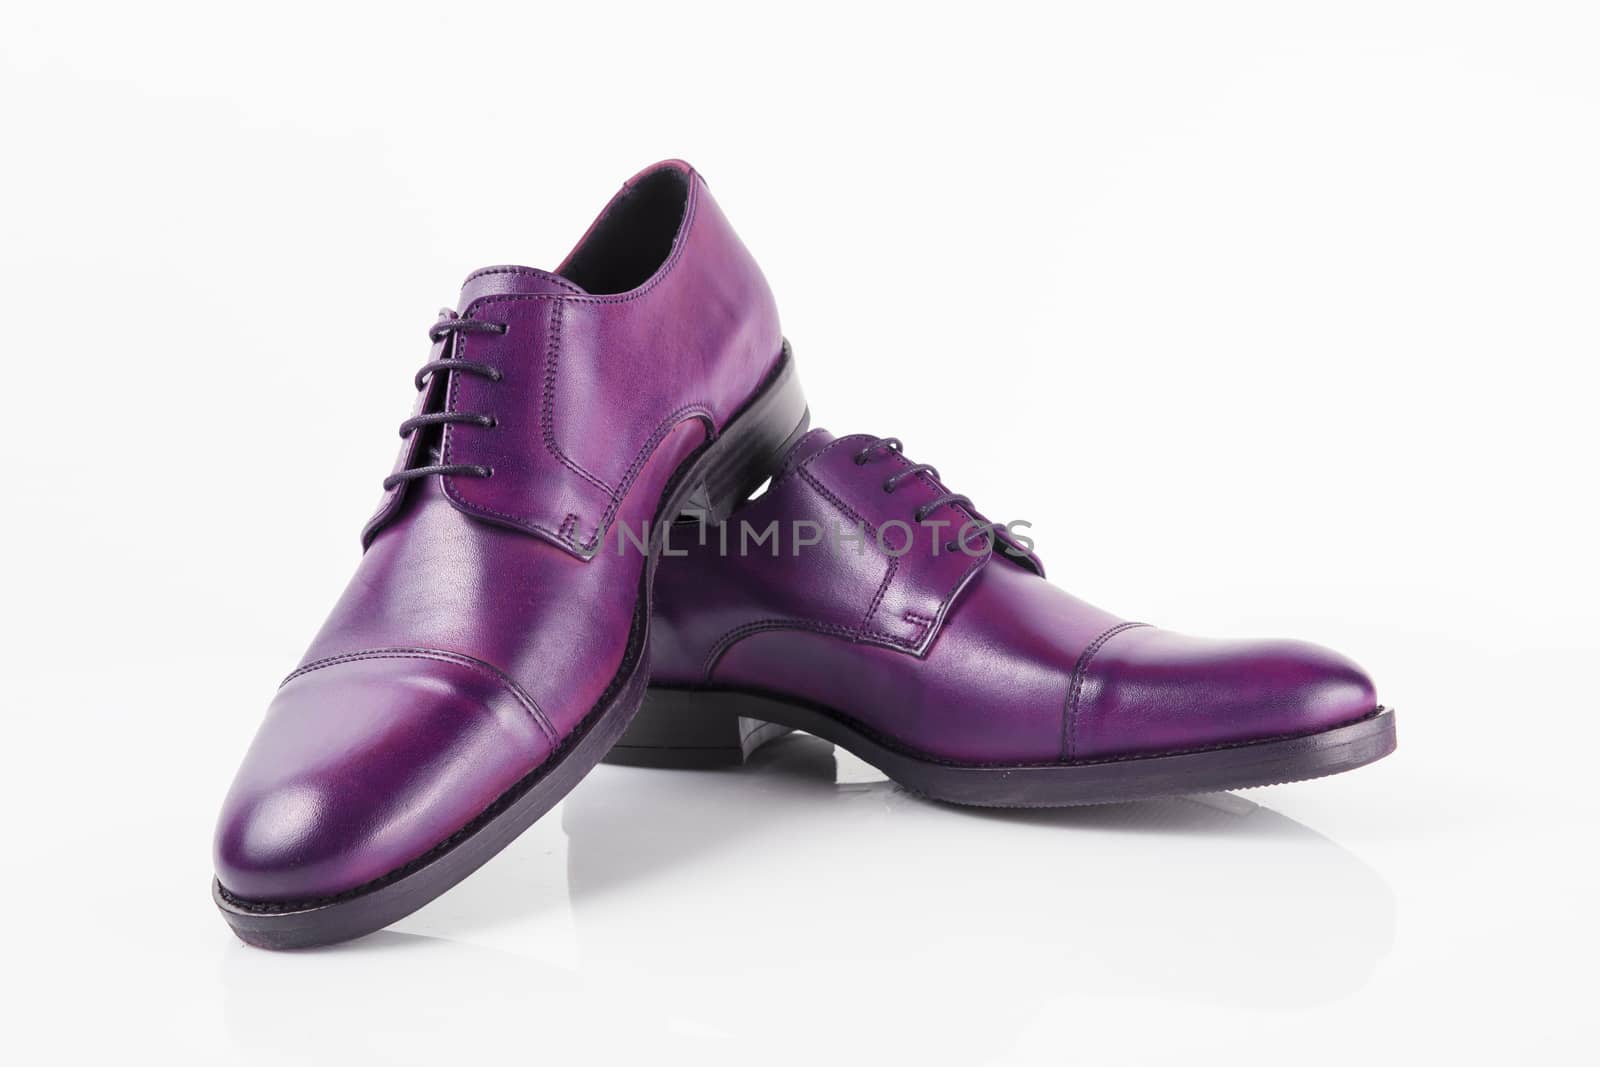 Male purple leather shoes on white background, isolated product.